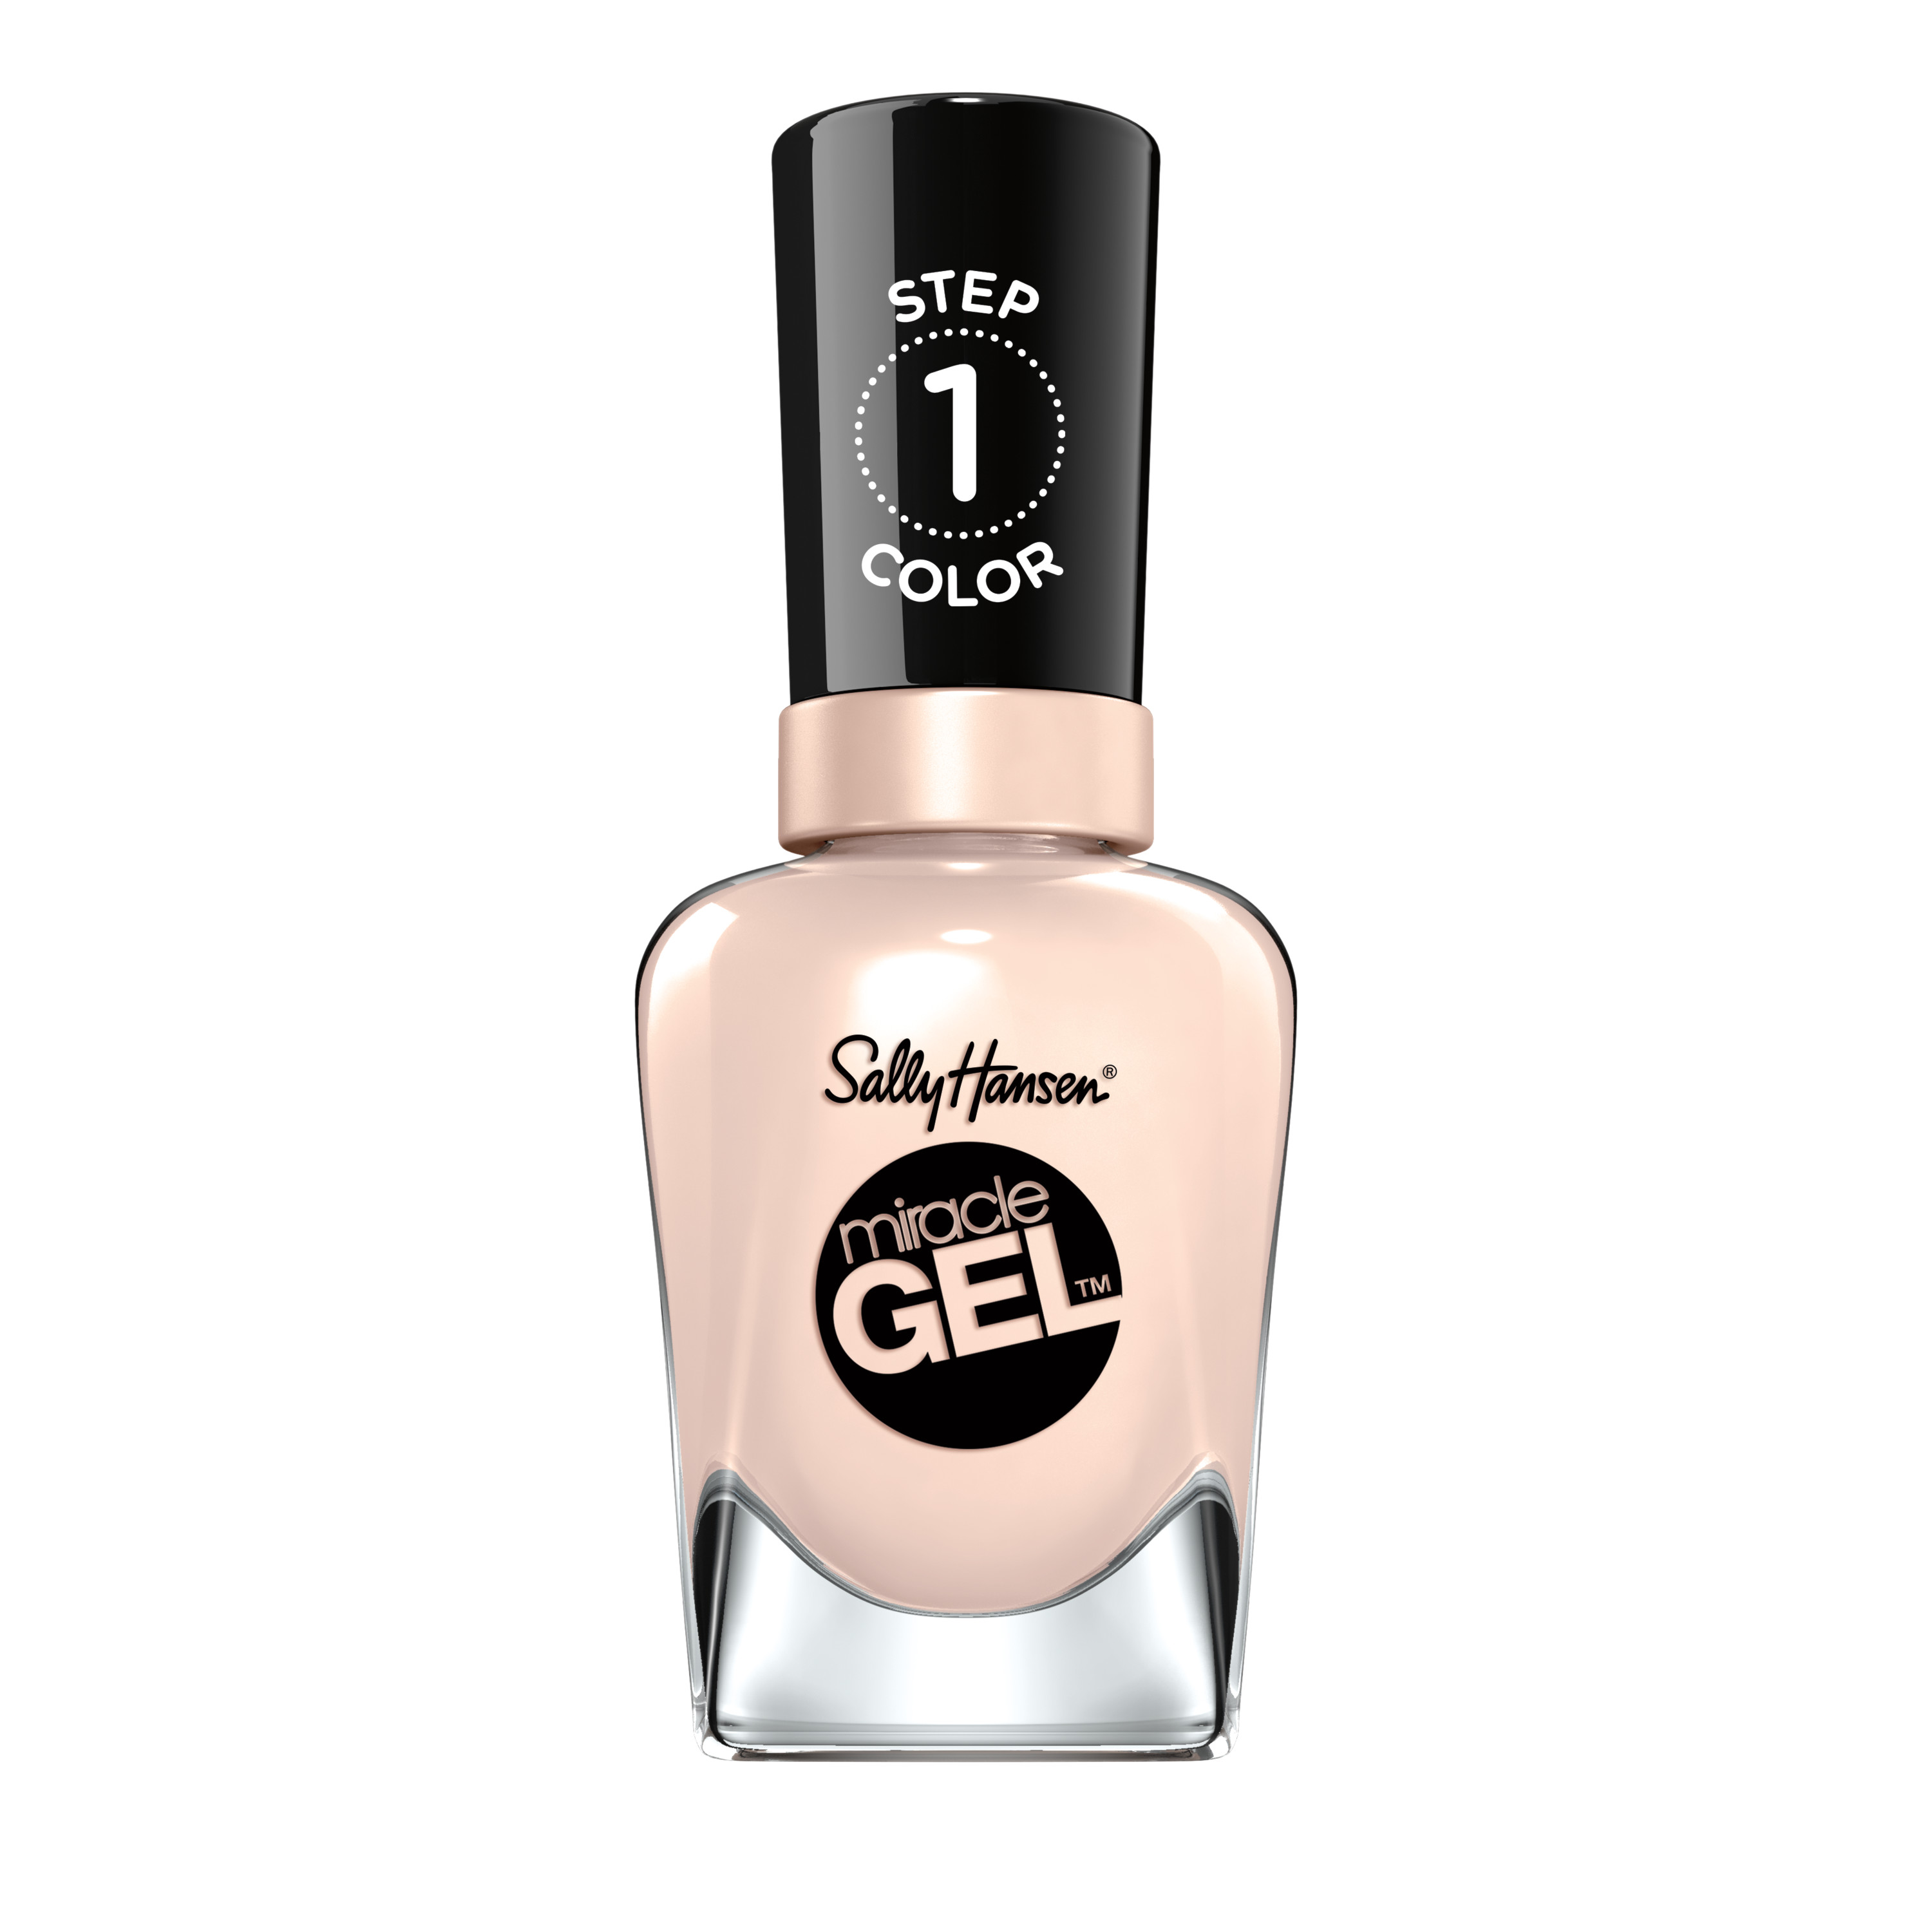 Sally Hansen Miracle Gel Nail Color, Birthday Suit, 0.5 oz, At Home Gel Nail Polish, Gel Nail Polish, No UV Lamp Needed, Long Lasting, Chip Resistant - image 1 of 19